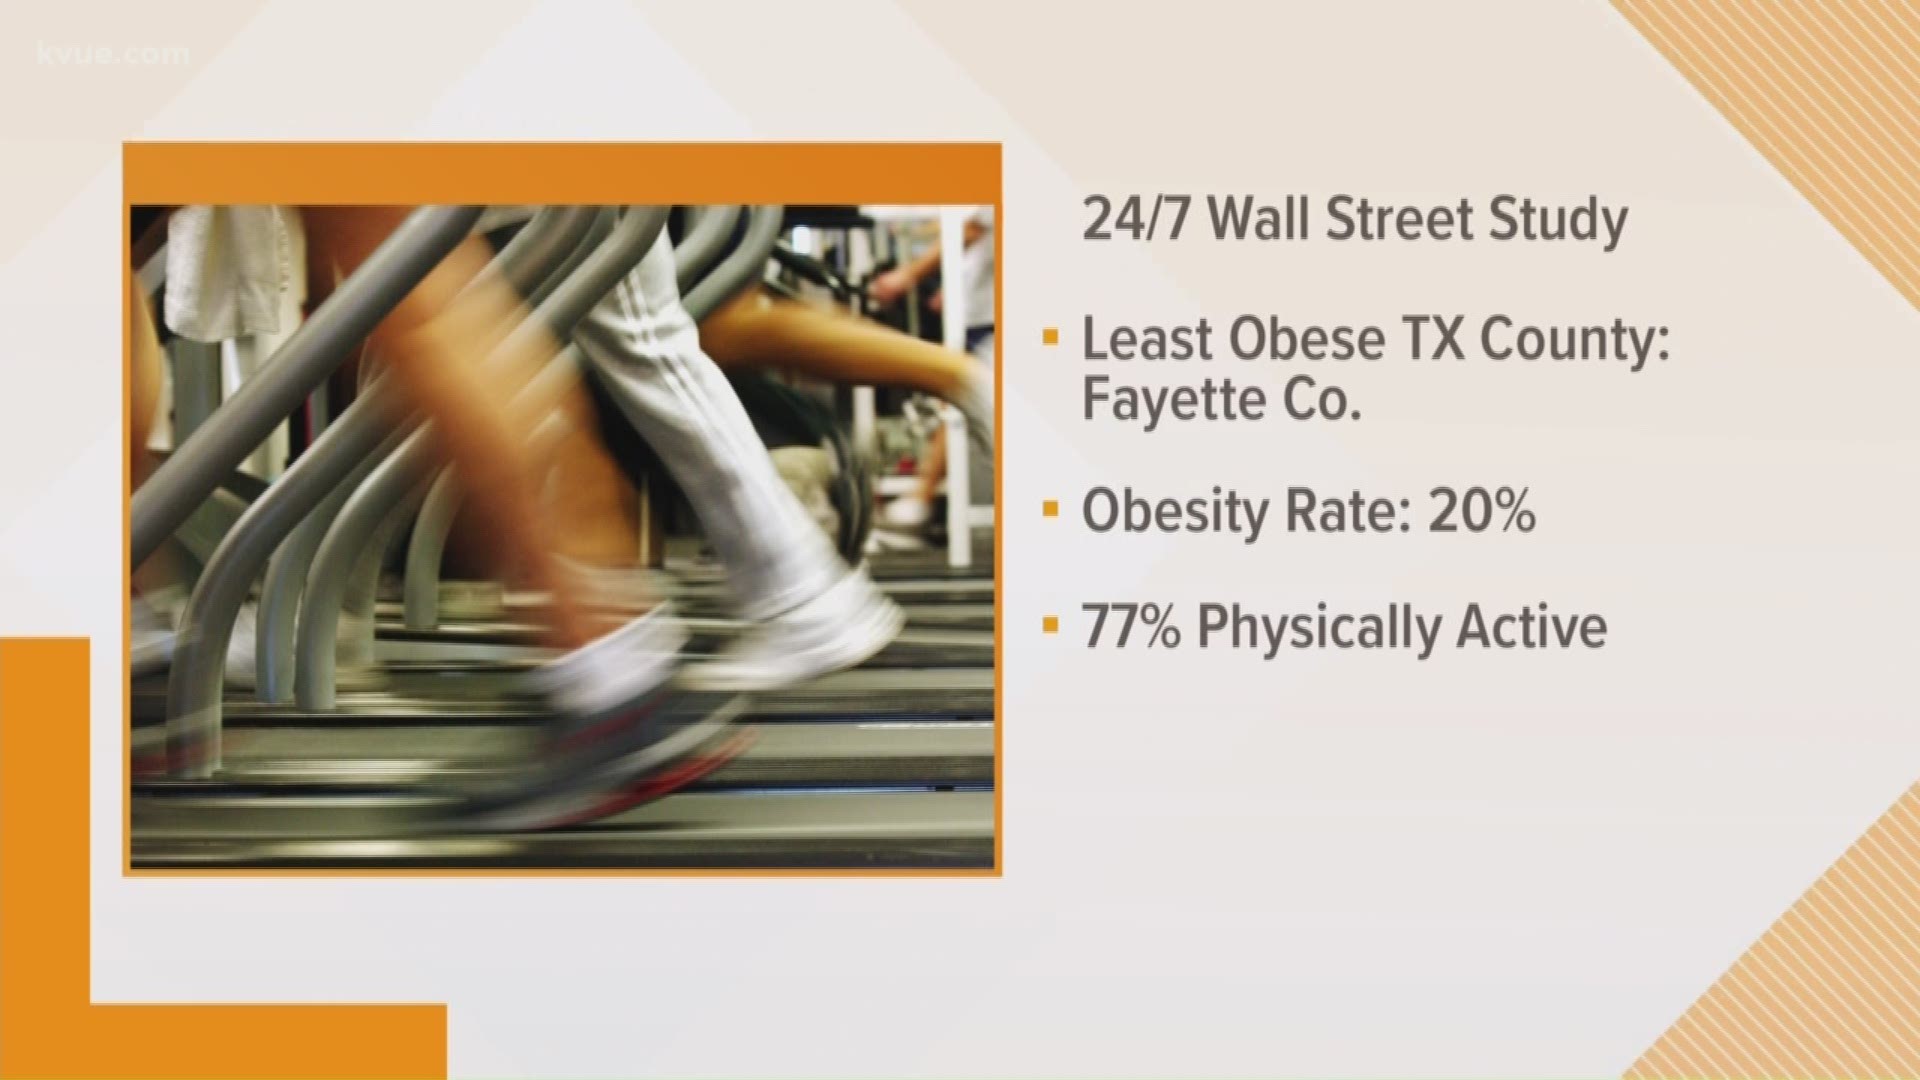 One Central Texas county is topping a list for the number of healthy people living in the area.